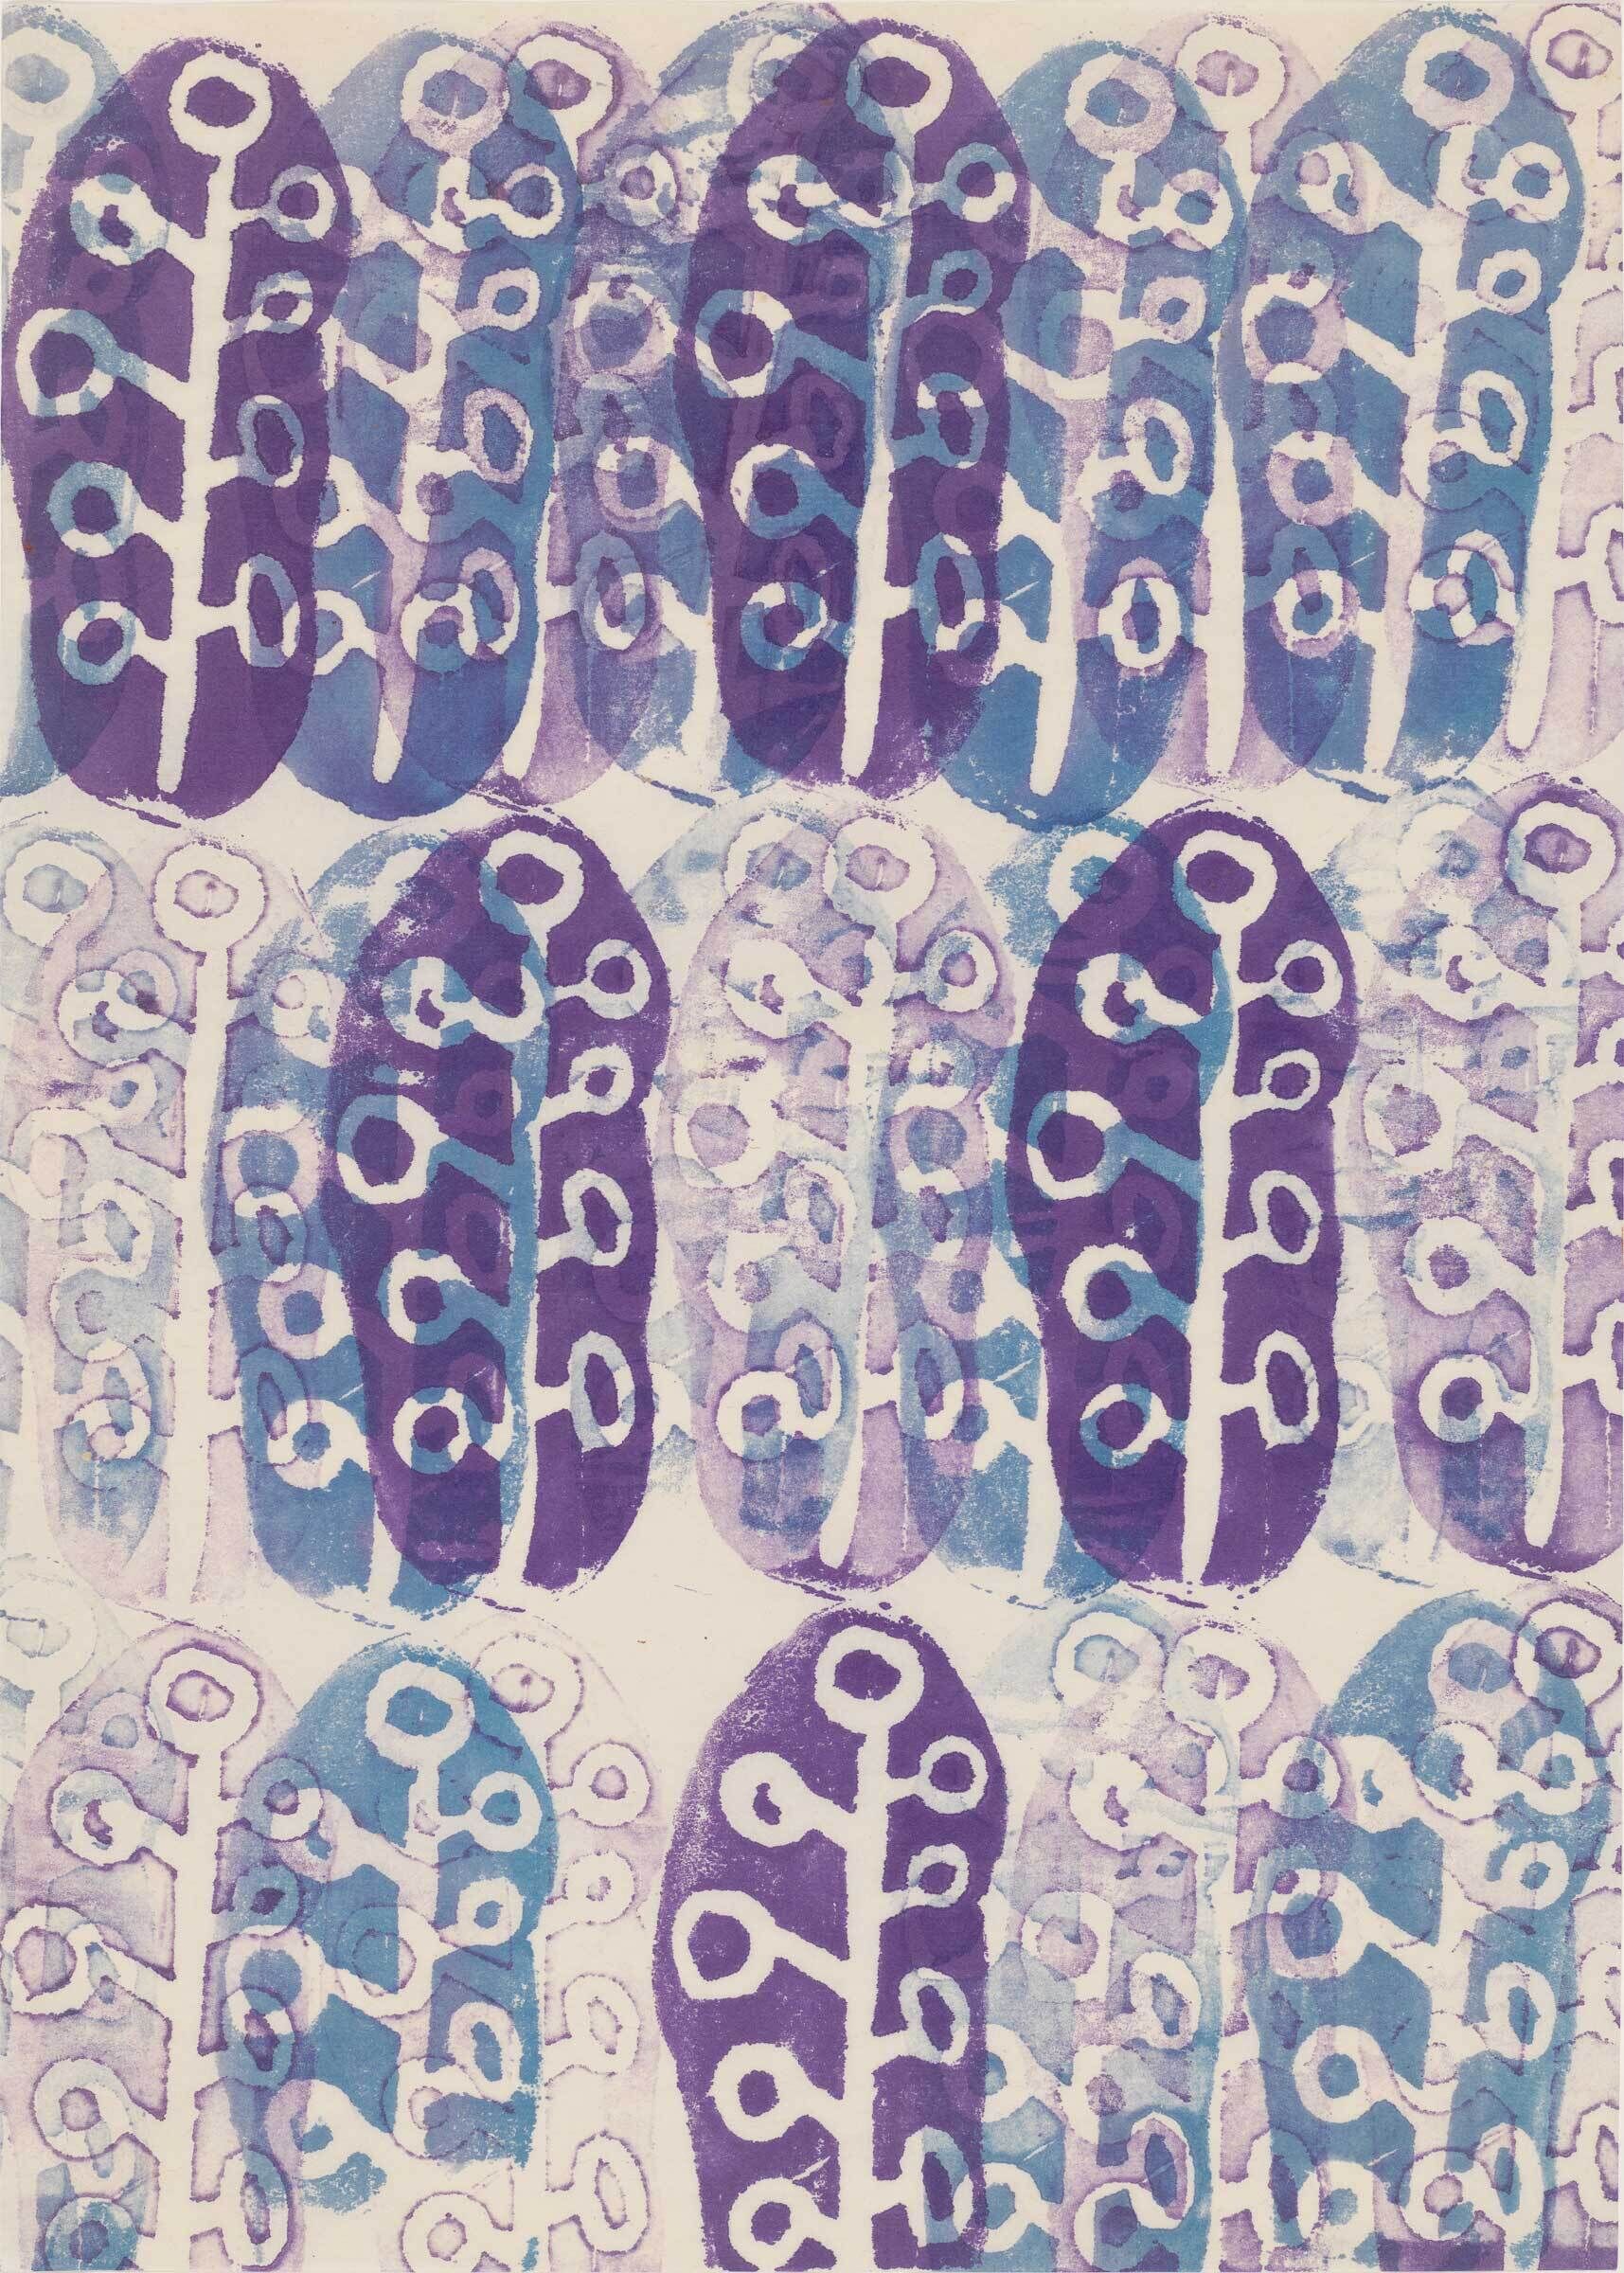 Three rows of a repeating stamped branch within an oval, overlapping horizontally in purples and blues